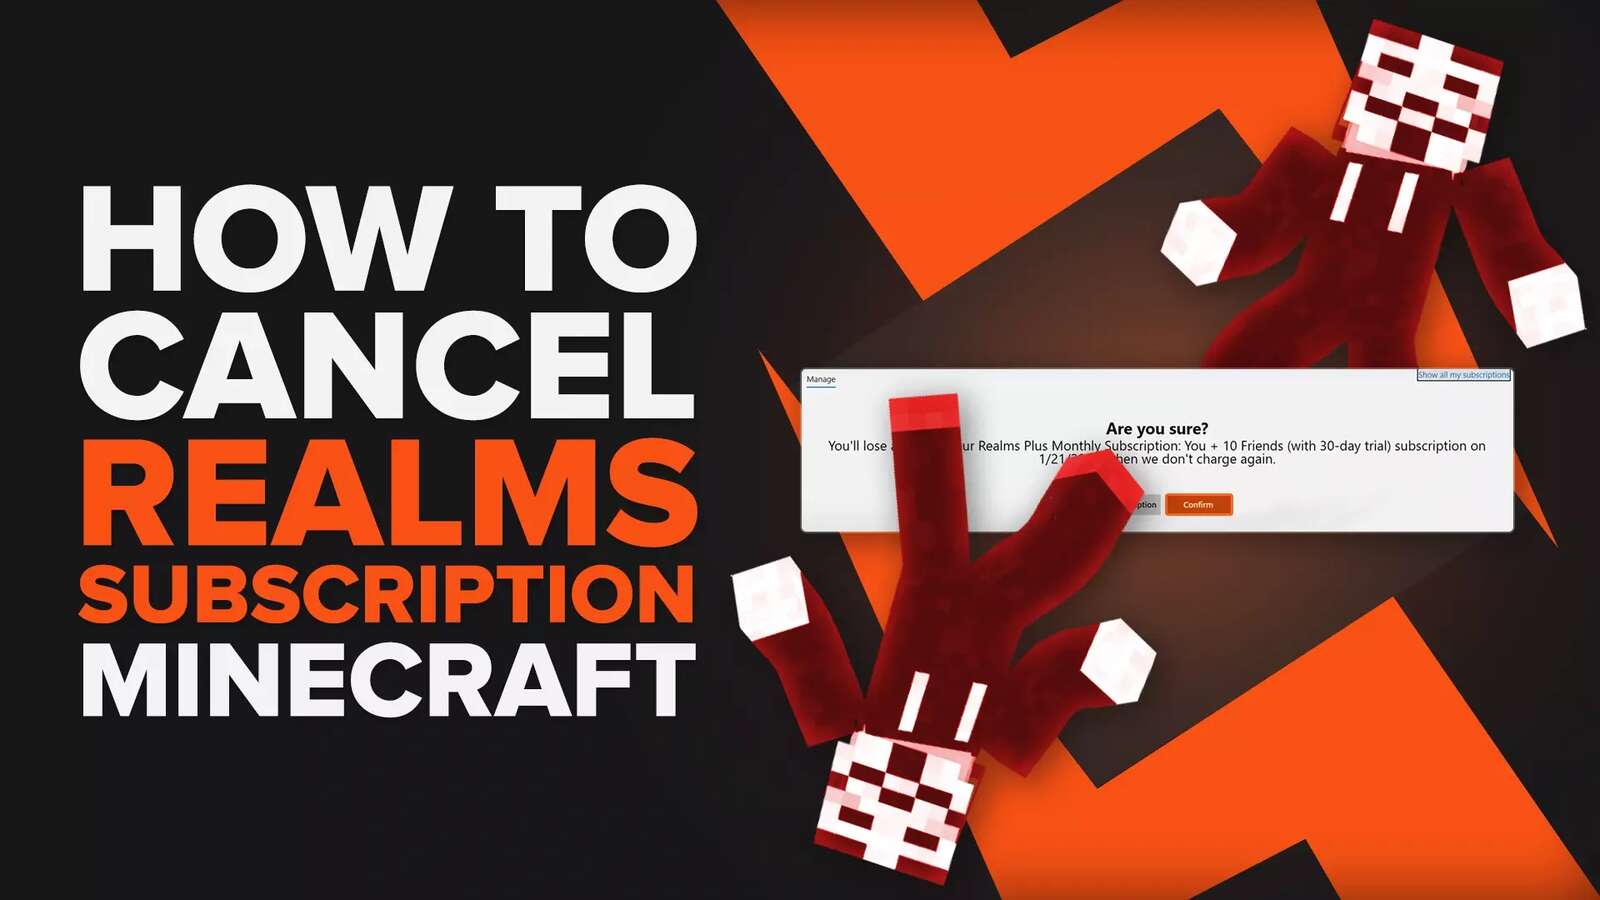 Here's How to Quickly Cancel Minecraft Realms Subscription